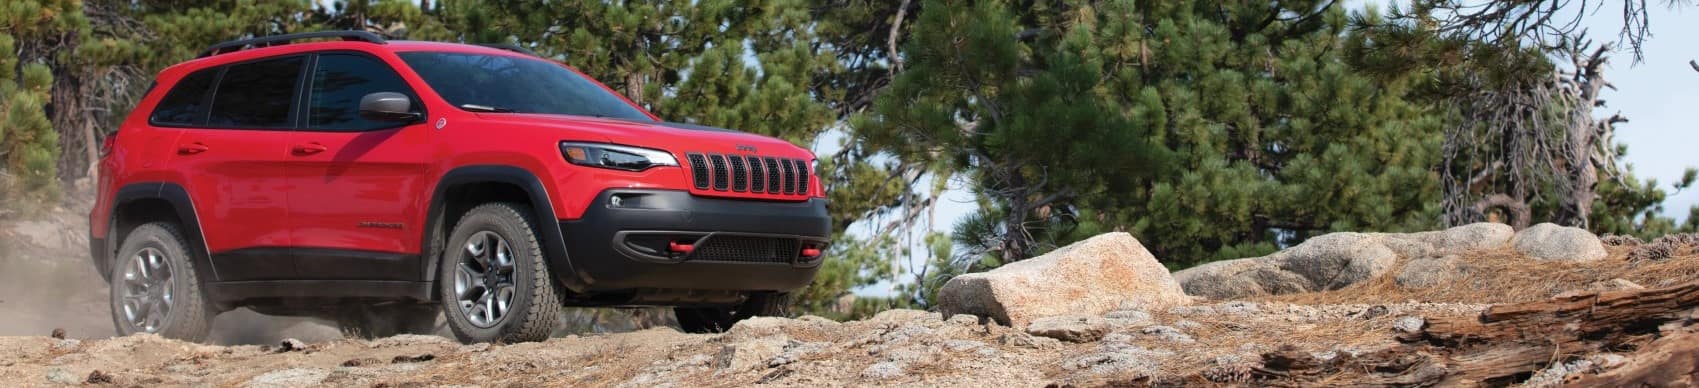 Used Jeep Cherokee Review